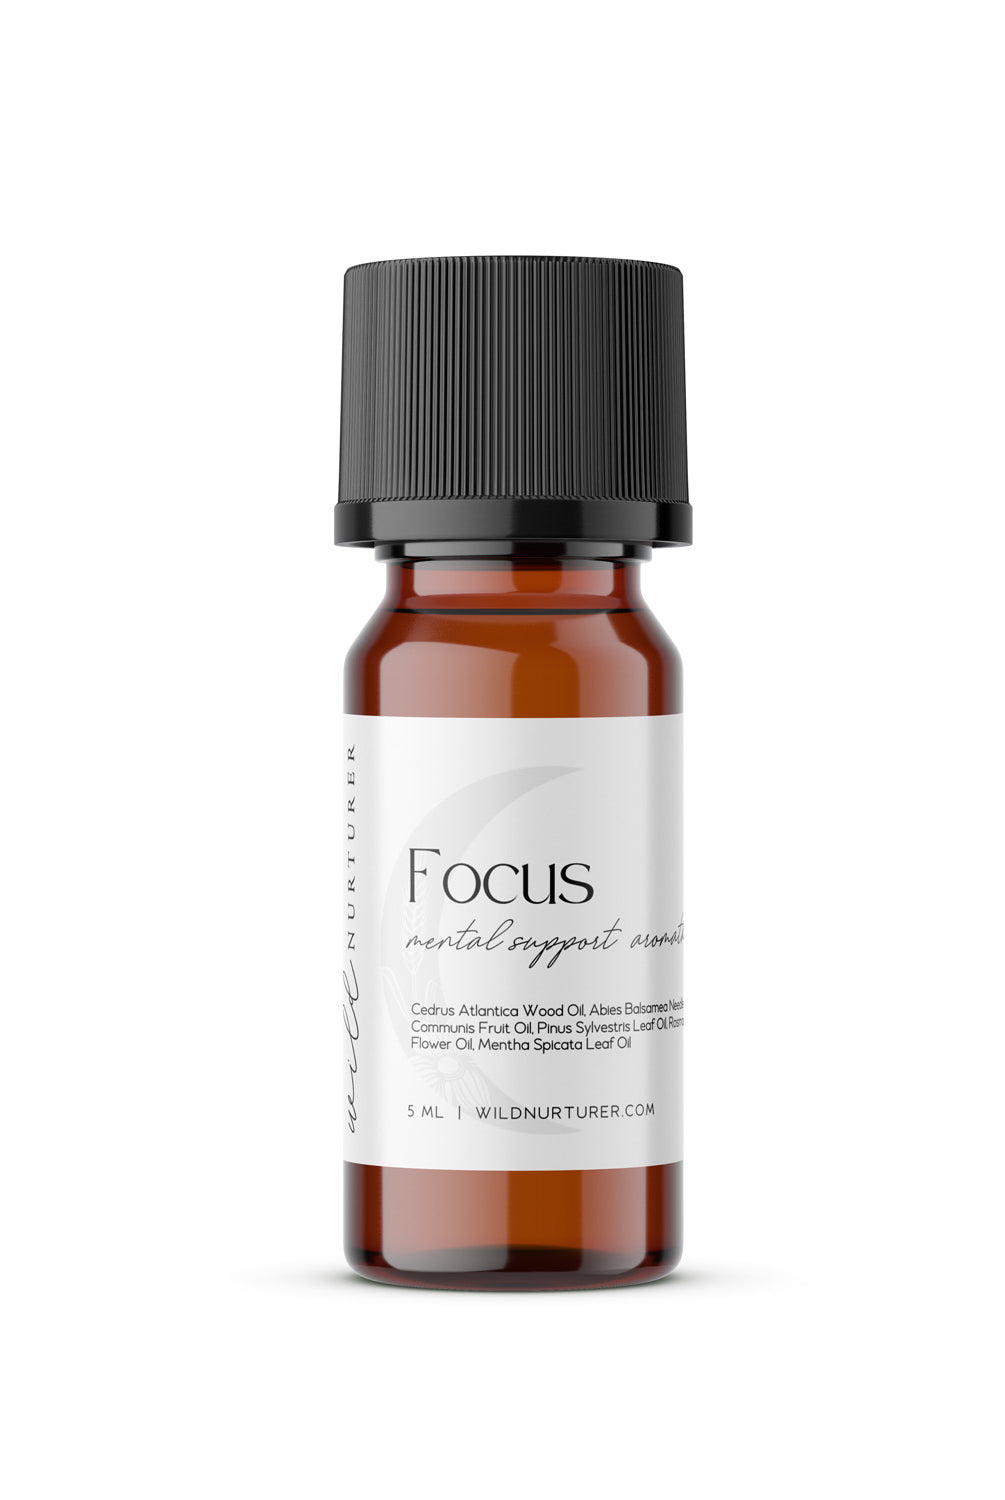 Two bottles of Wild Nurturer Aromatherapy's "Focus Blend" essential oil spray, one larger with a spray nozzle and one smaller with a dropper, both with white labels on a white background.